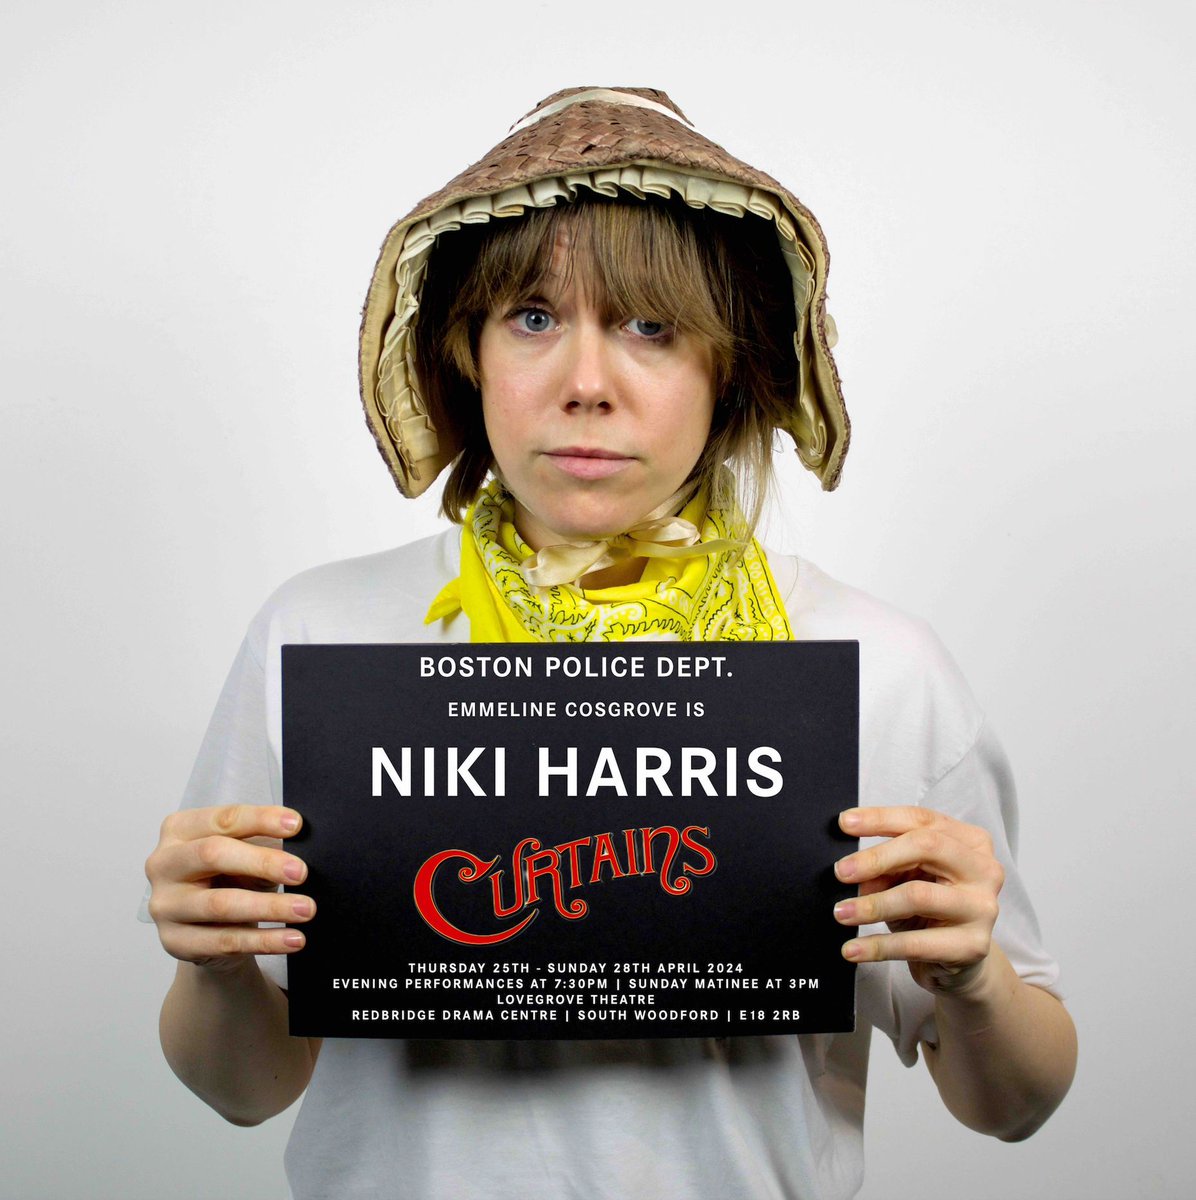 📢INTRODUCING📢 EMMELINE COSGROVE is NIKI HARRIS Will she make it as a Broadway Star? Find out in #Curtains at @RedbridgeDrama 25th-28th April 2024! All Tickets £20. Get your tickets here: buff.ly/3NRAuf5 #CurtainsMusical #KanderAndEbb #Redbridge #RedbridgeEvents